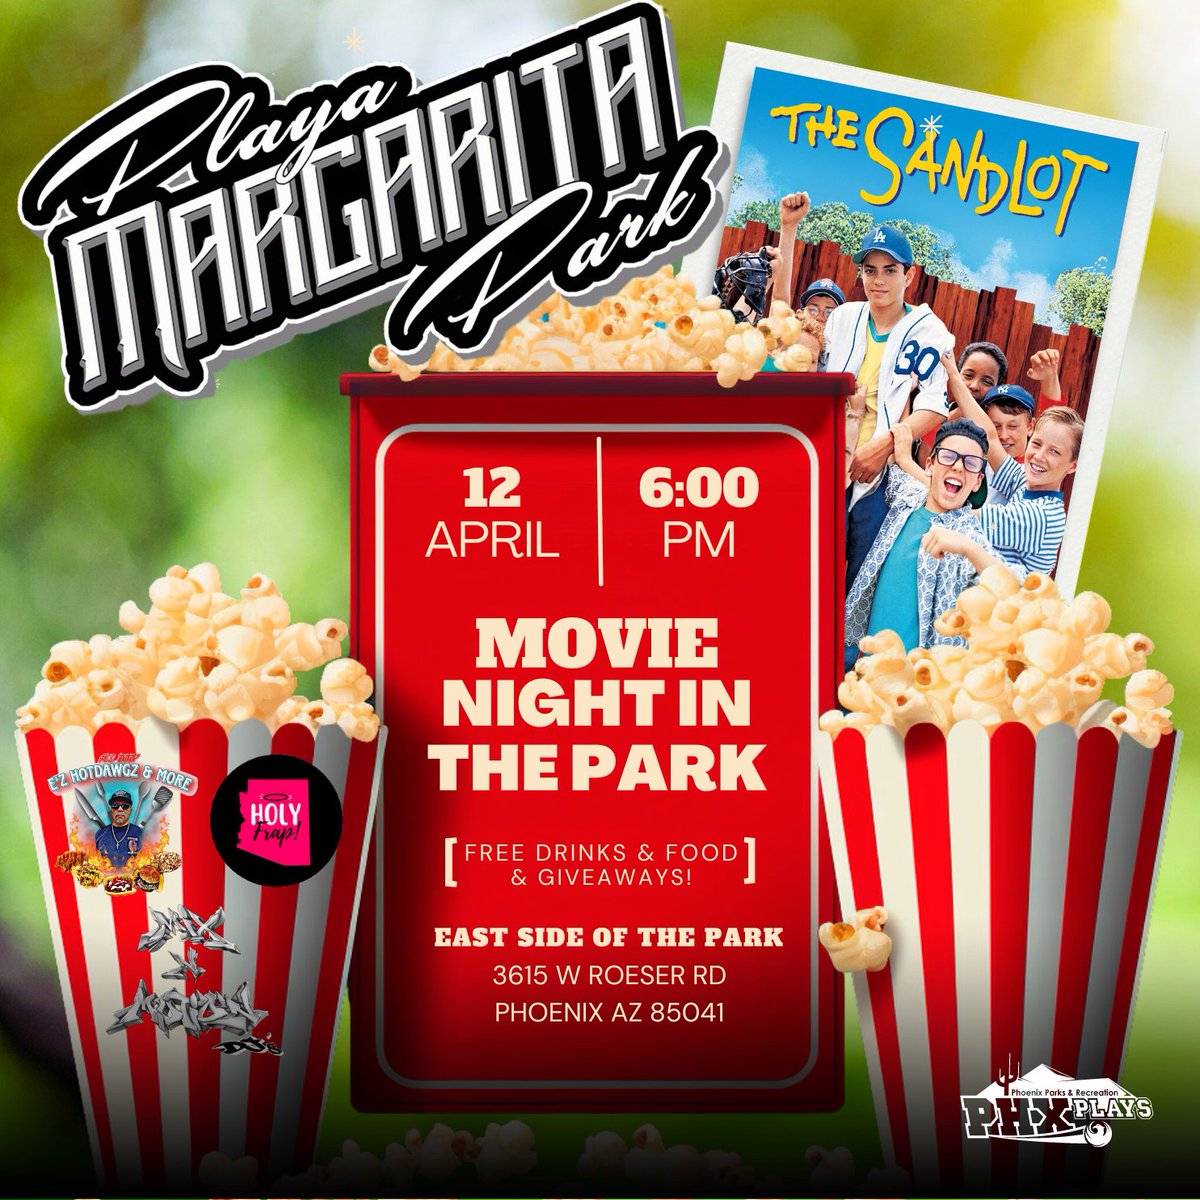 🌌 Lights, camera, action! We're hosting a Movie in the Park night at Playa Margarita Park. Enjoy THE SANDLOT, free food, and drinks on April 12th, 6:00PM. Bring the family and join us for movie night! 📍 Playa Margarita Park, 3615 W Roeser Rd ⏰ 6:00 PM, Movie Screening Begins